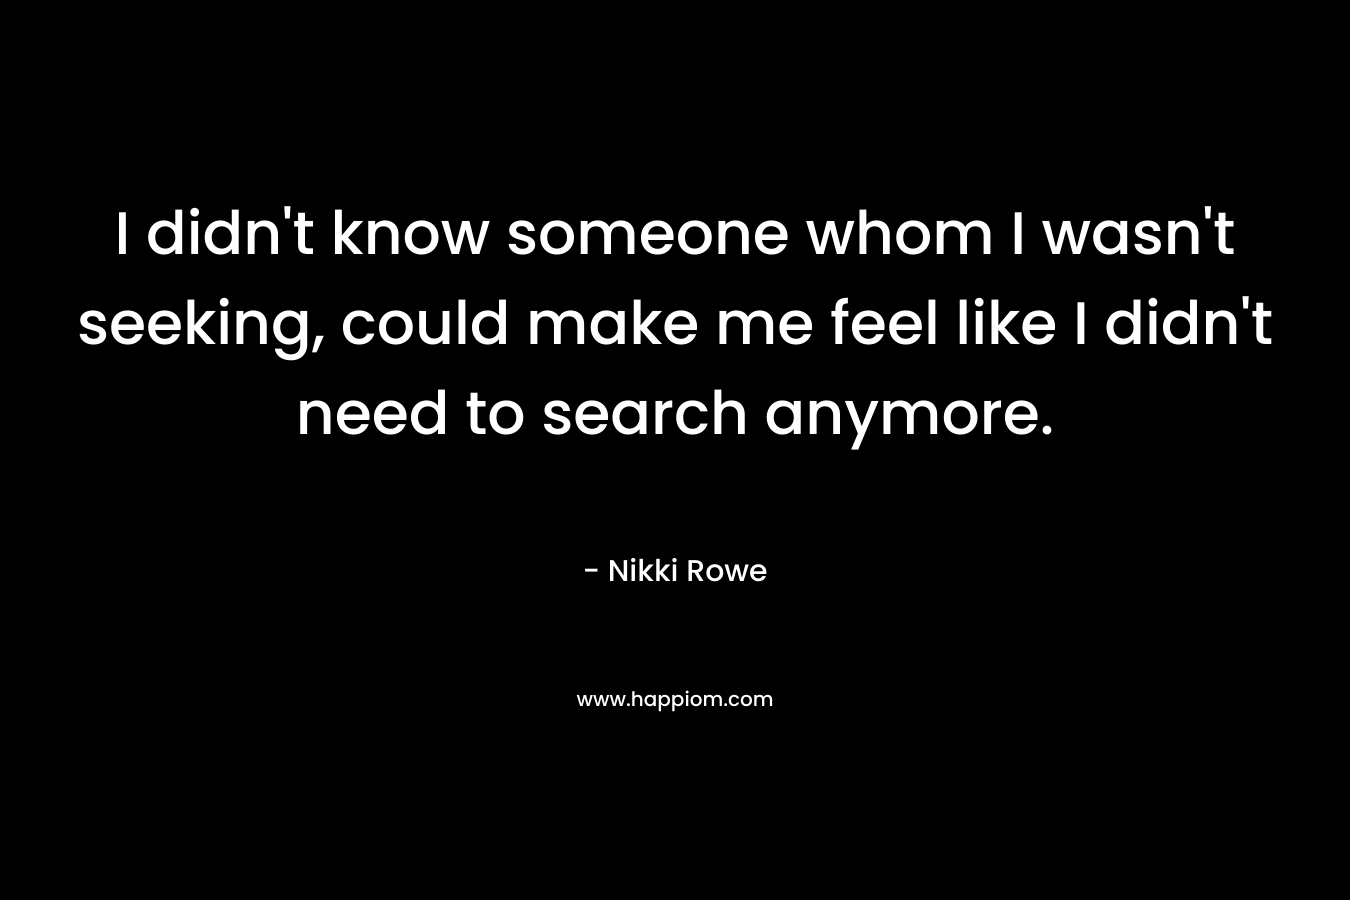 I didn’t know someone whom I wasn’t seeking, could make me feel like I didn’t need to search anymore. – Nikki Rowe